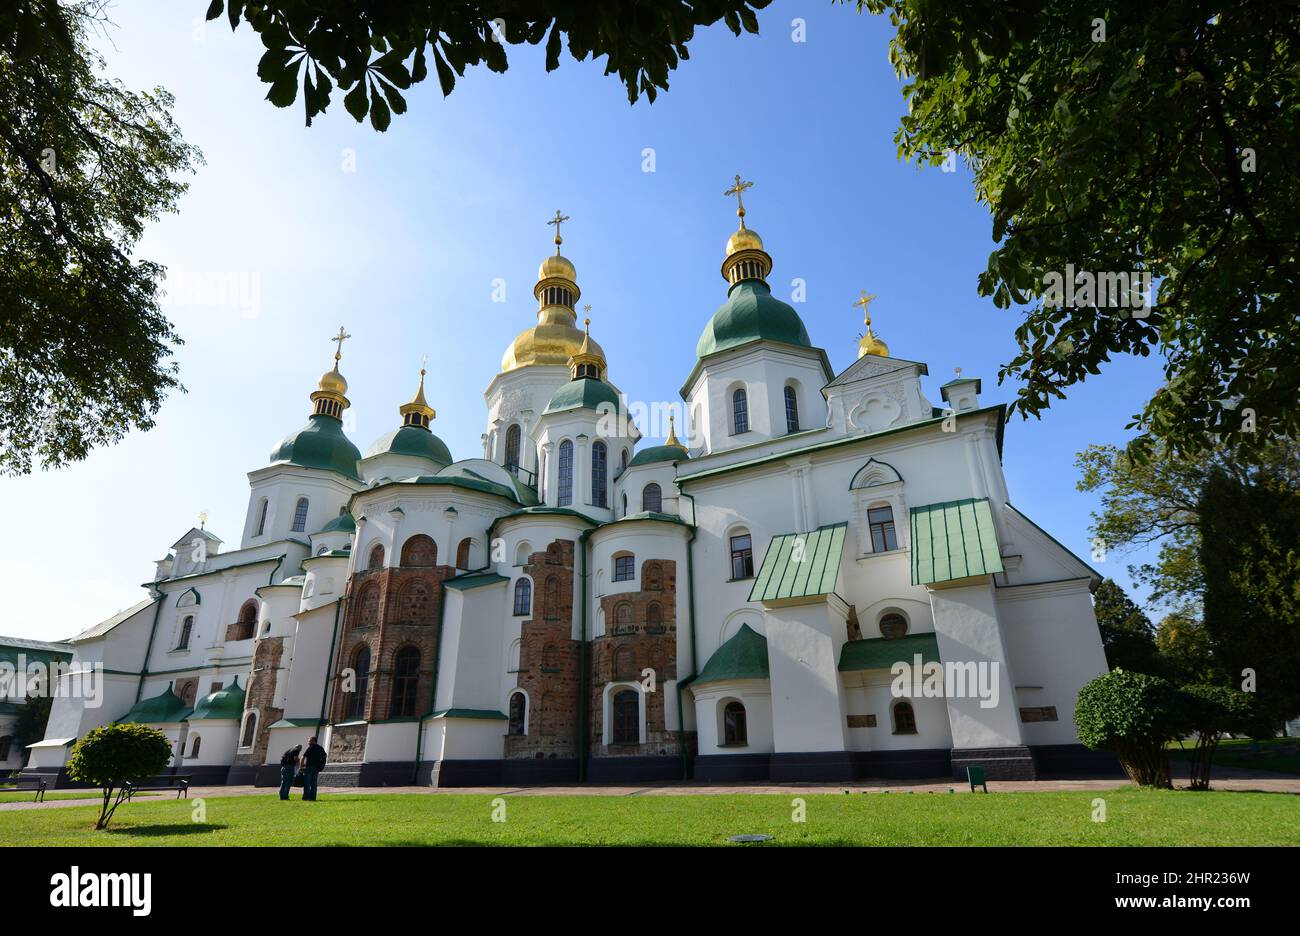 St. Sophia's Cathedral in the heart of Kyiv, Ukraine. Stock Photo